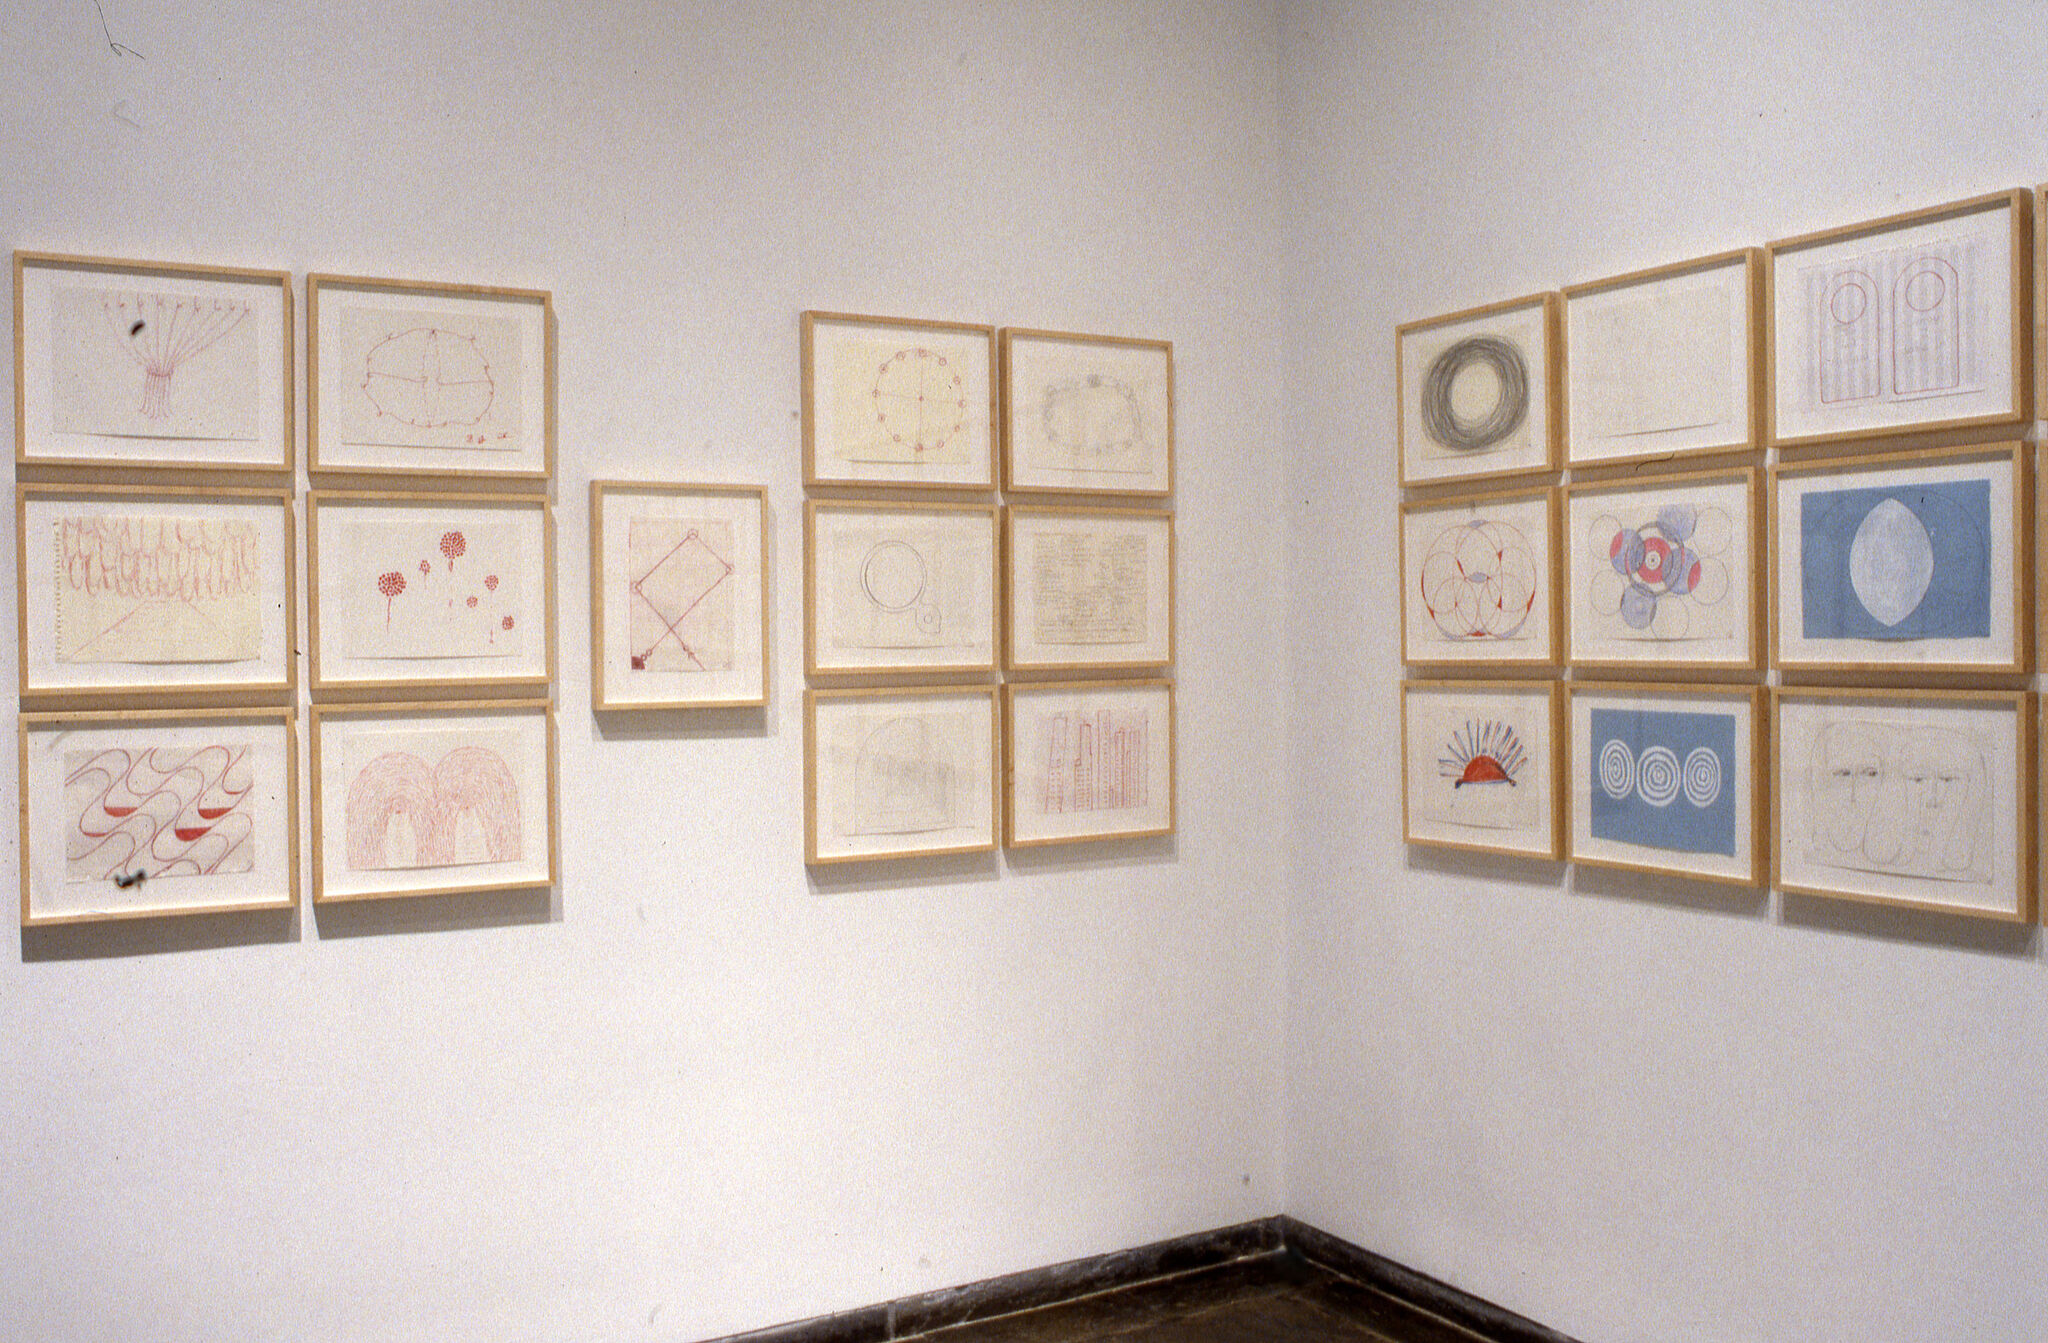 Drawings displayed in frames hung on walls of a gallery.